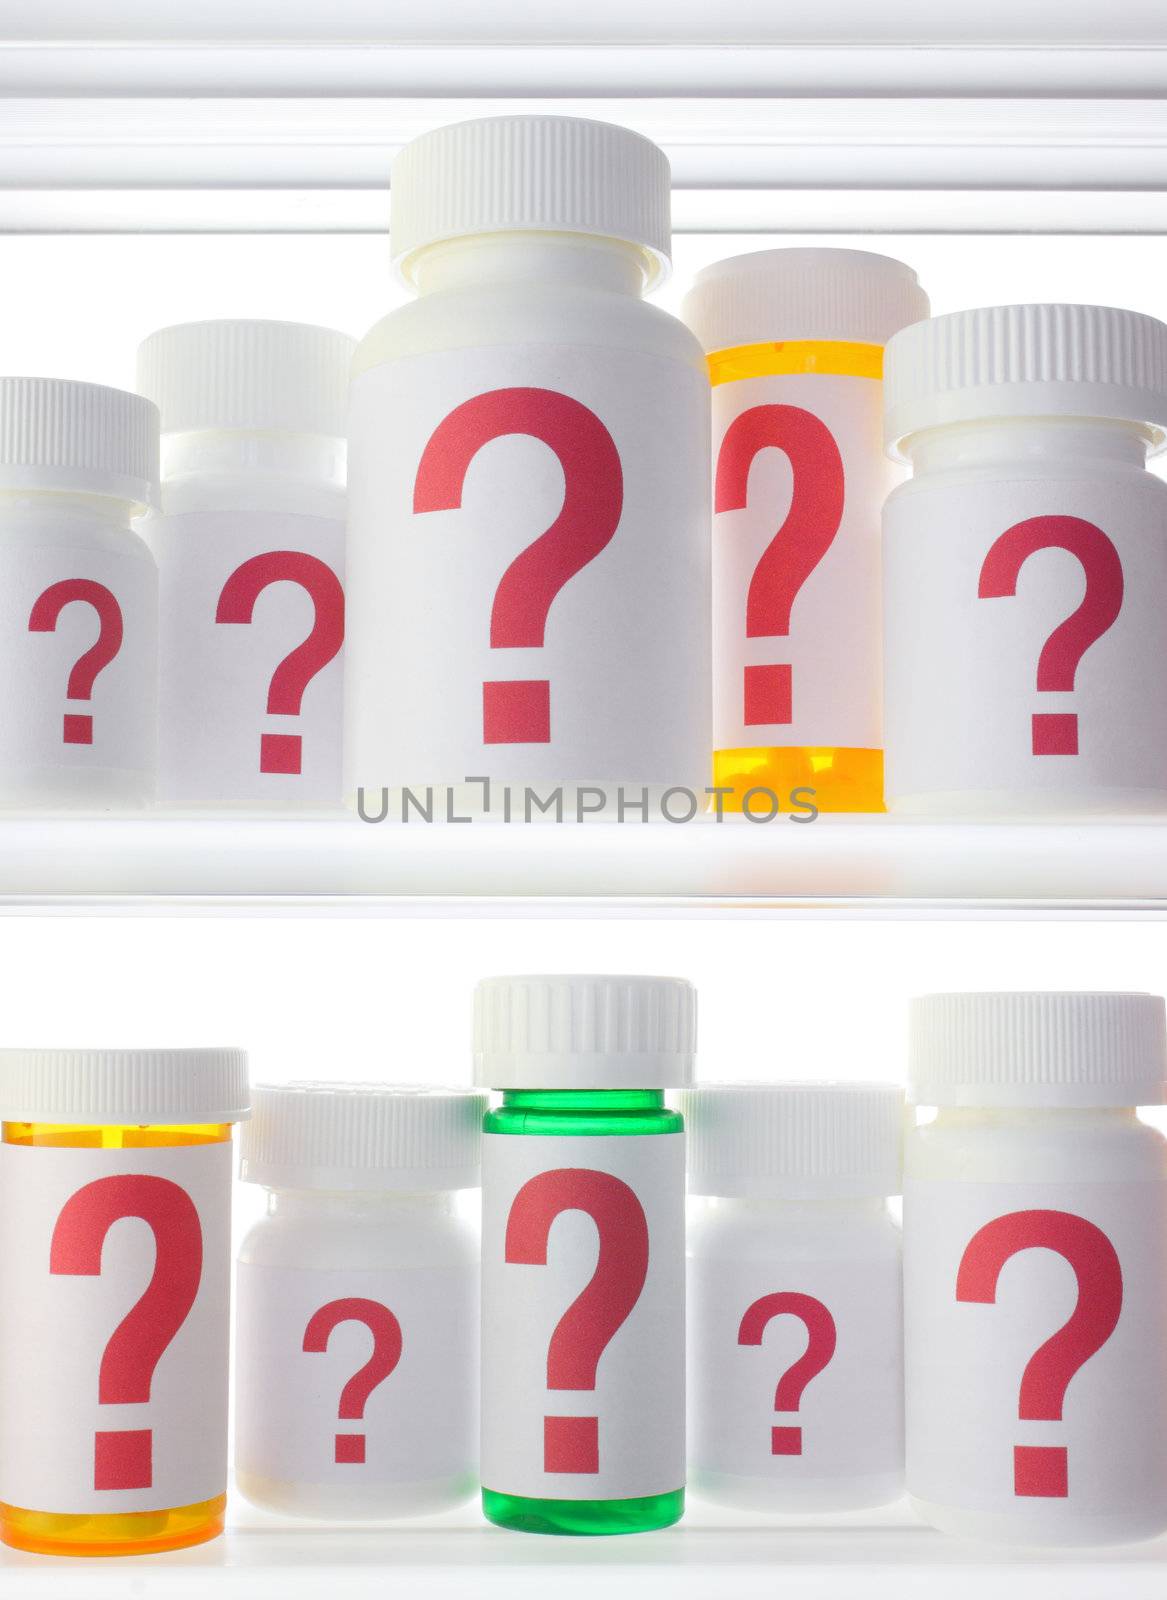 Close crop of medicine cabinet shelves filled with pill bottles, each labeled with a red question mark.  Lighting is neutral with strong backlighting.